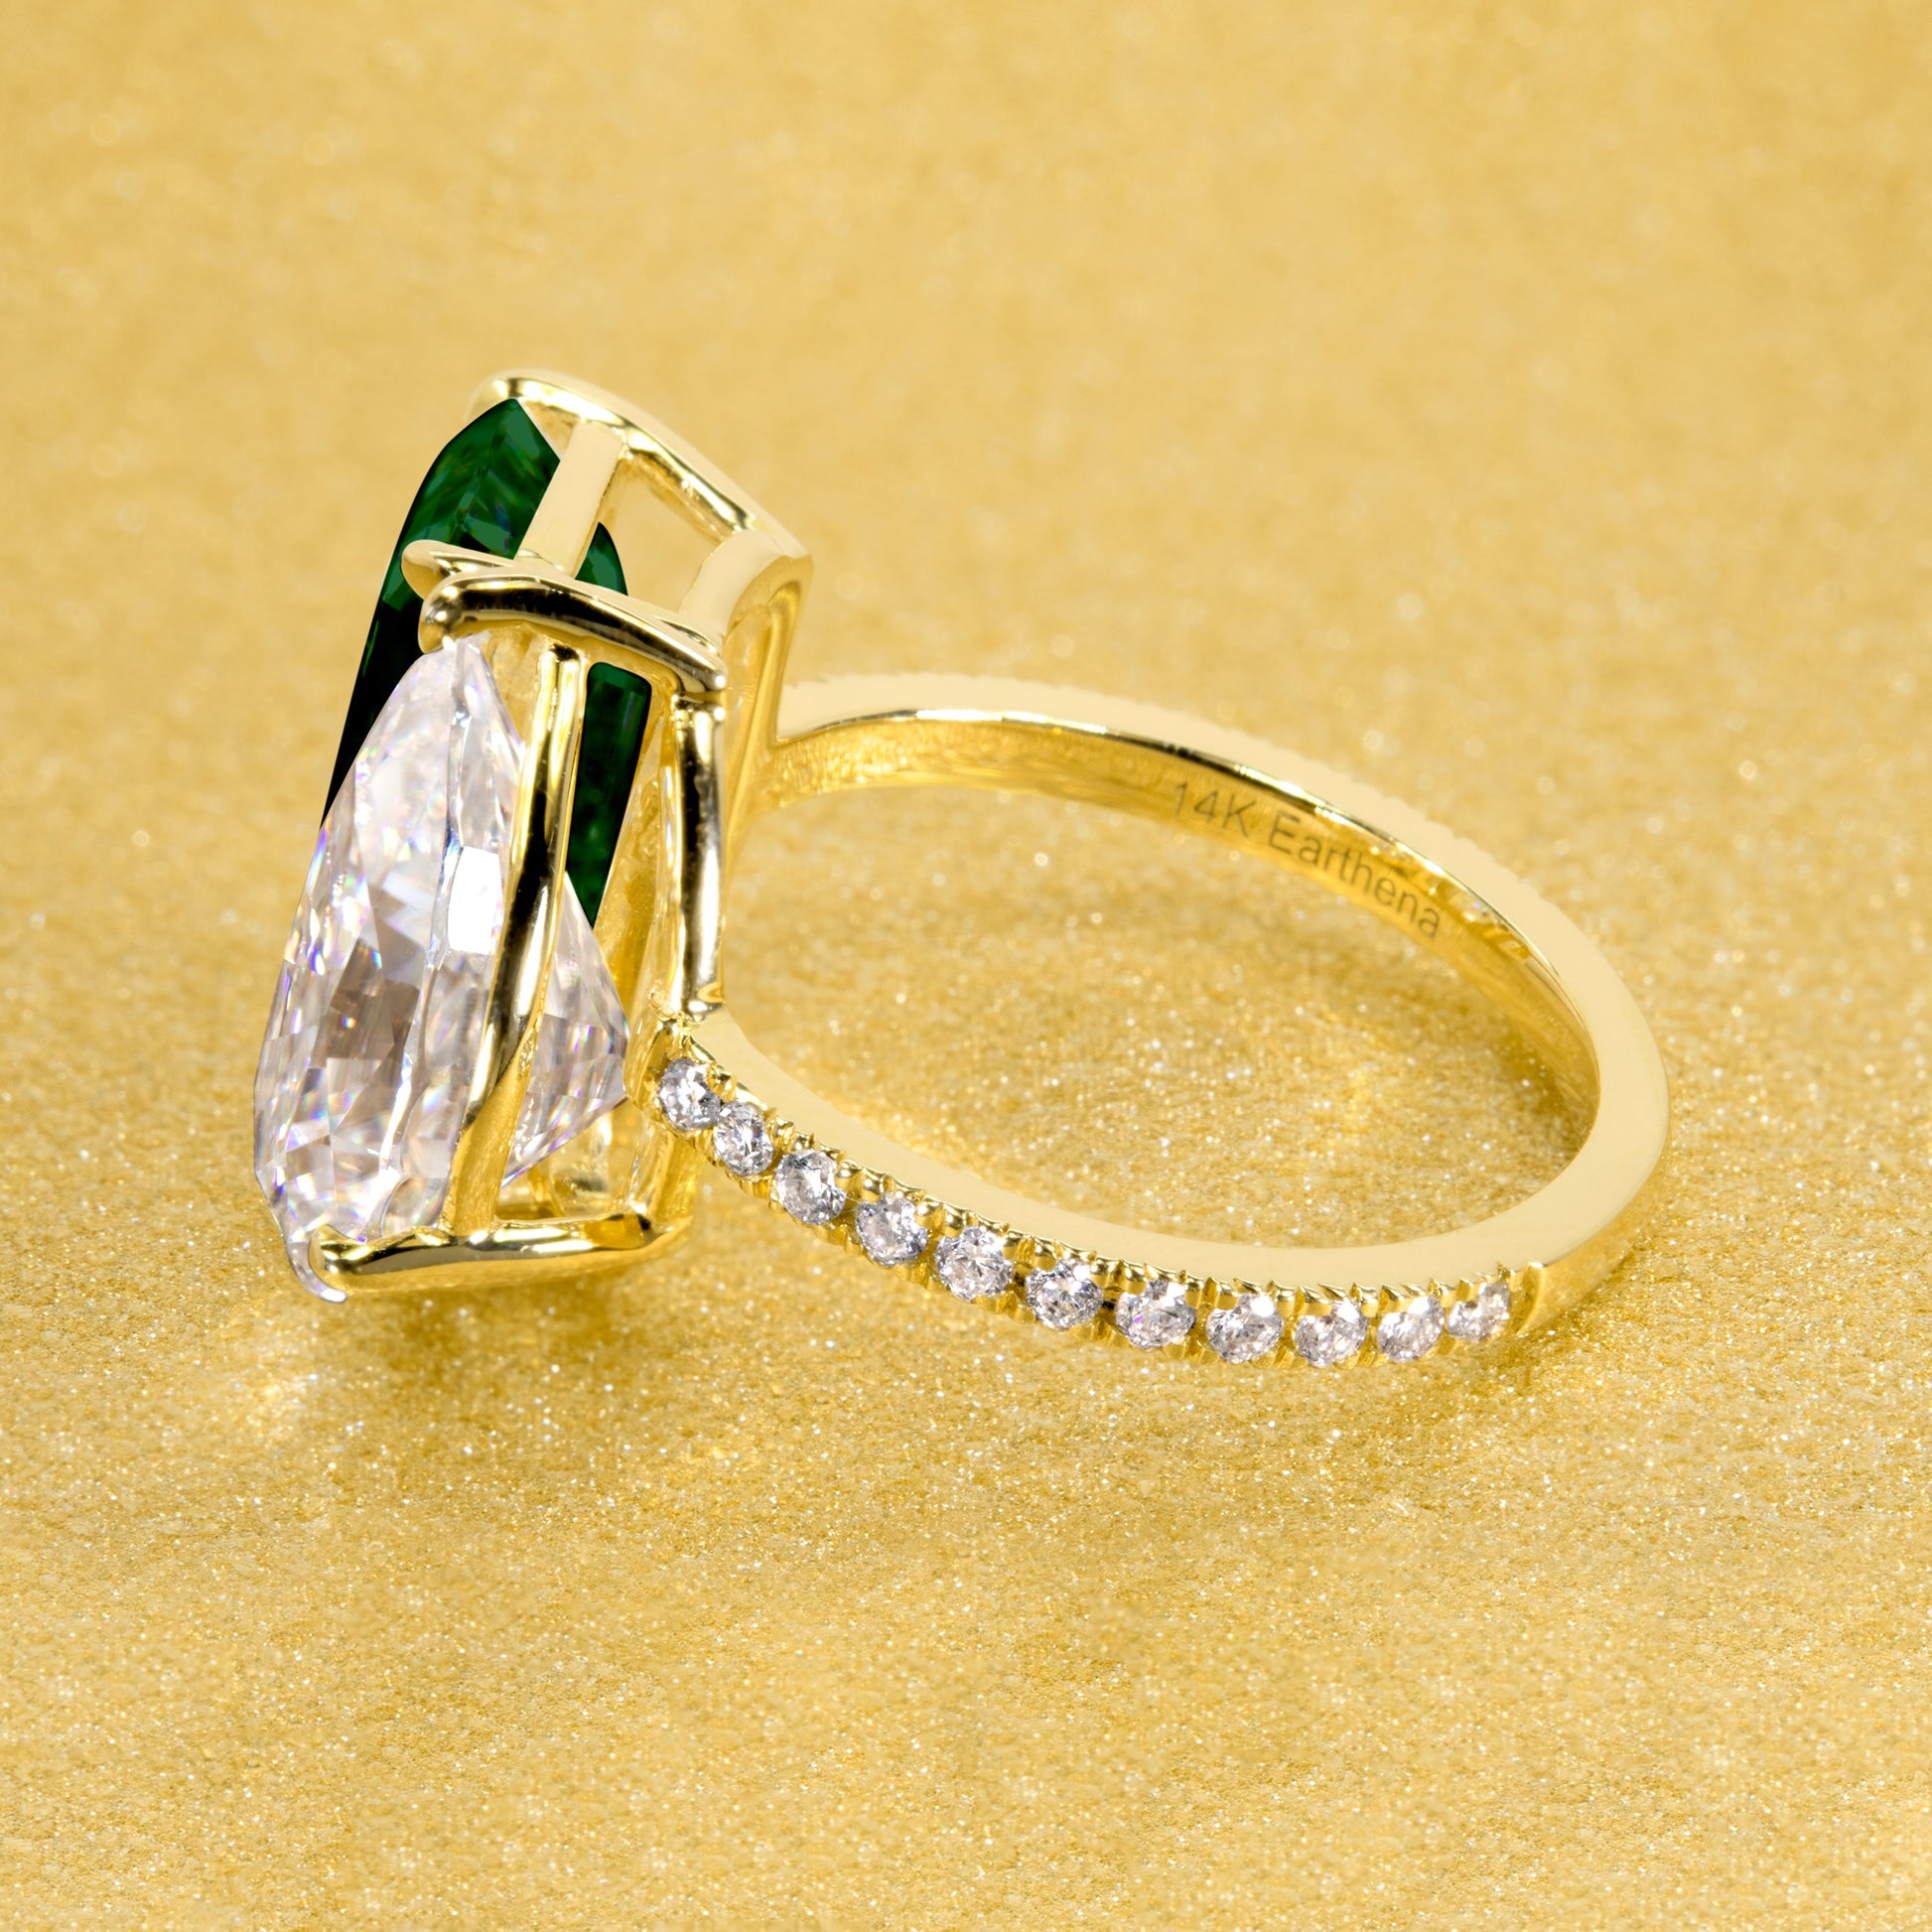 The Gemini, Toi et Moi 6 ctw Elongated lab-grown Green-emerald and Pear-shaped Moissanite Lab-grown Diamond Engagement Ring crafted in 14K or 18K gold by Earthena Jewelry